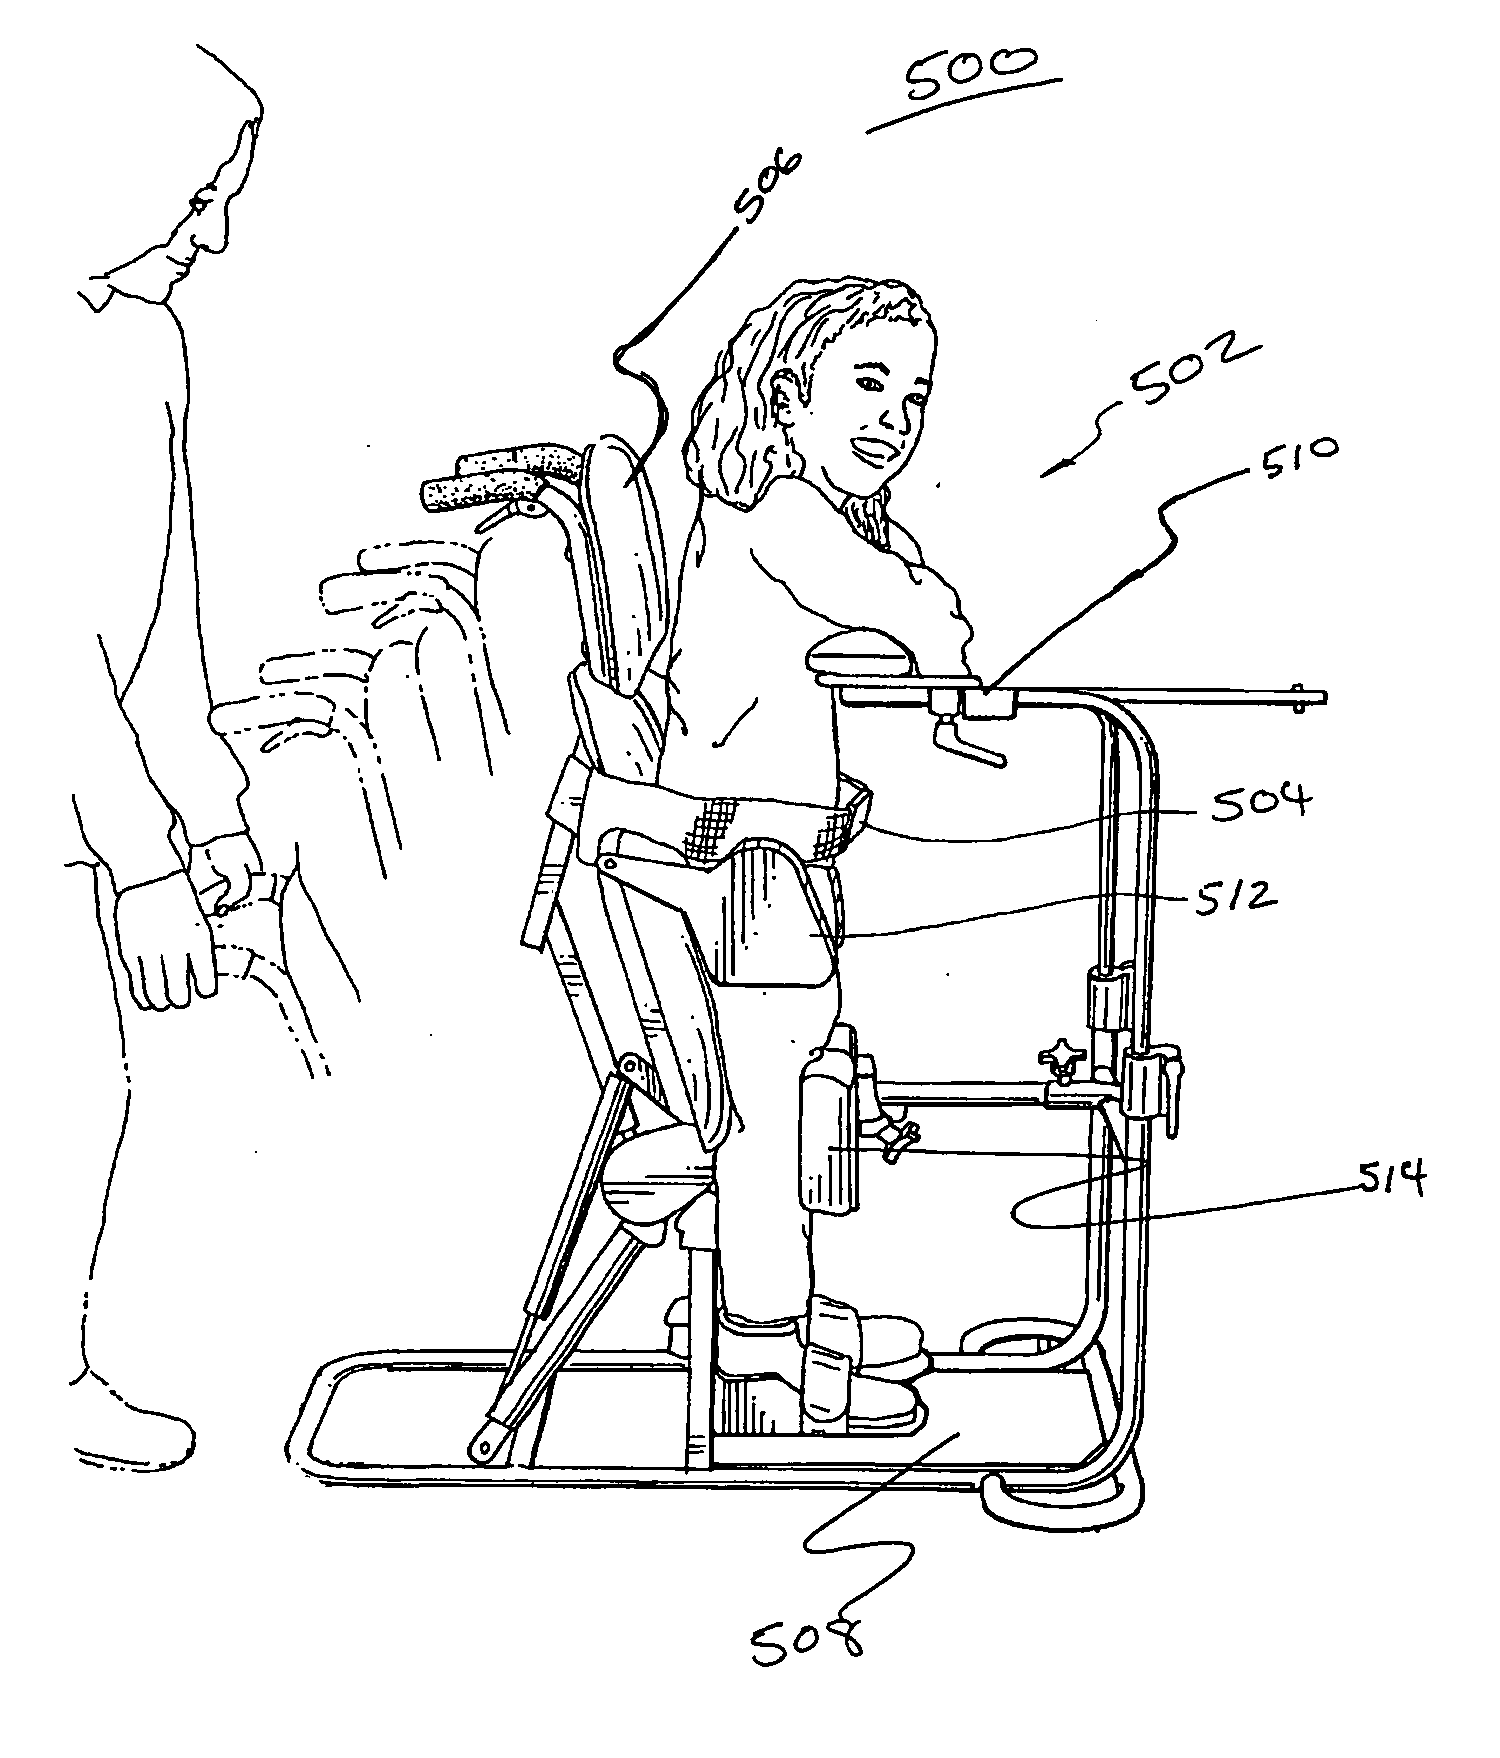 Assisted-standing gear for use with dynamic-motion plates